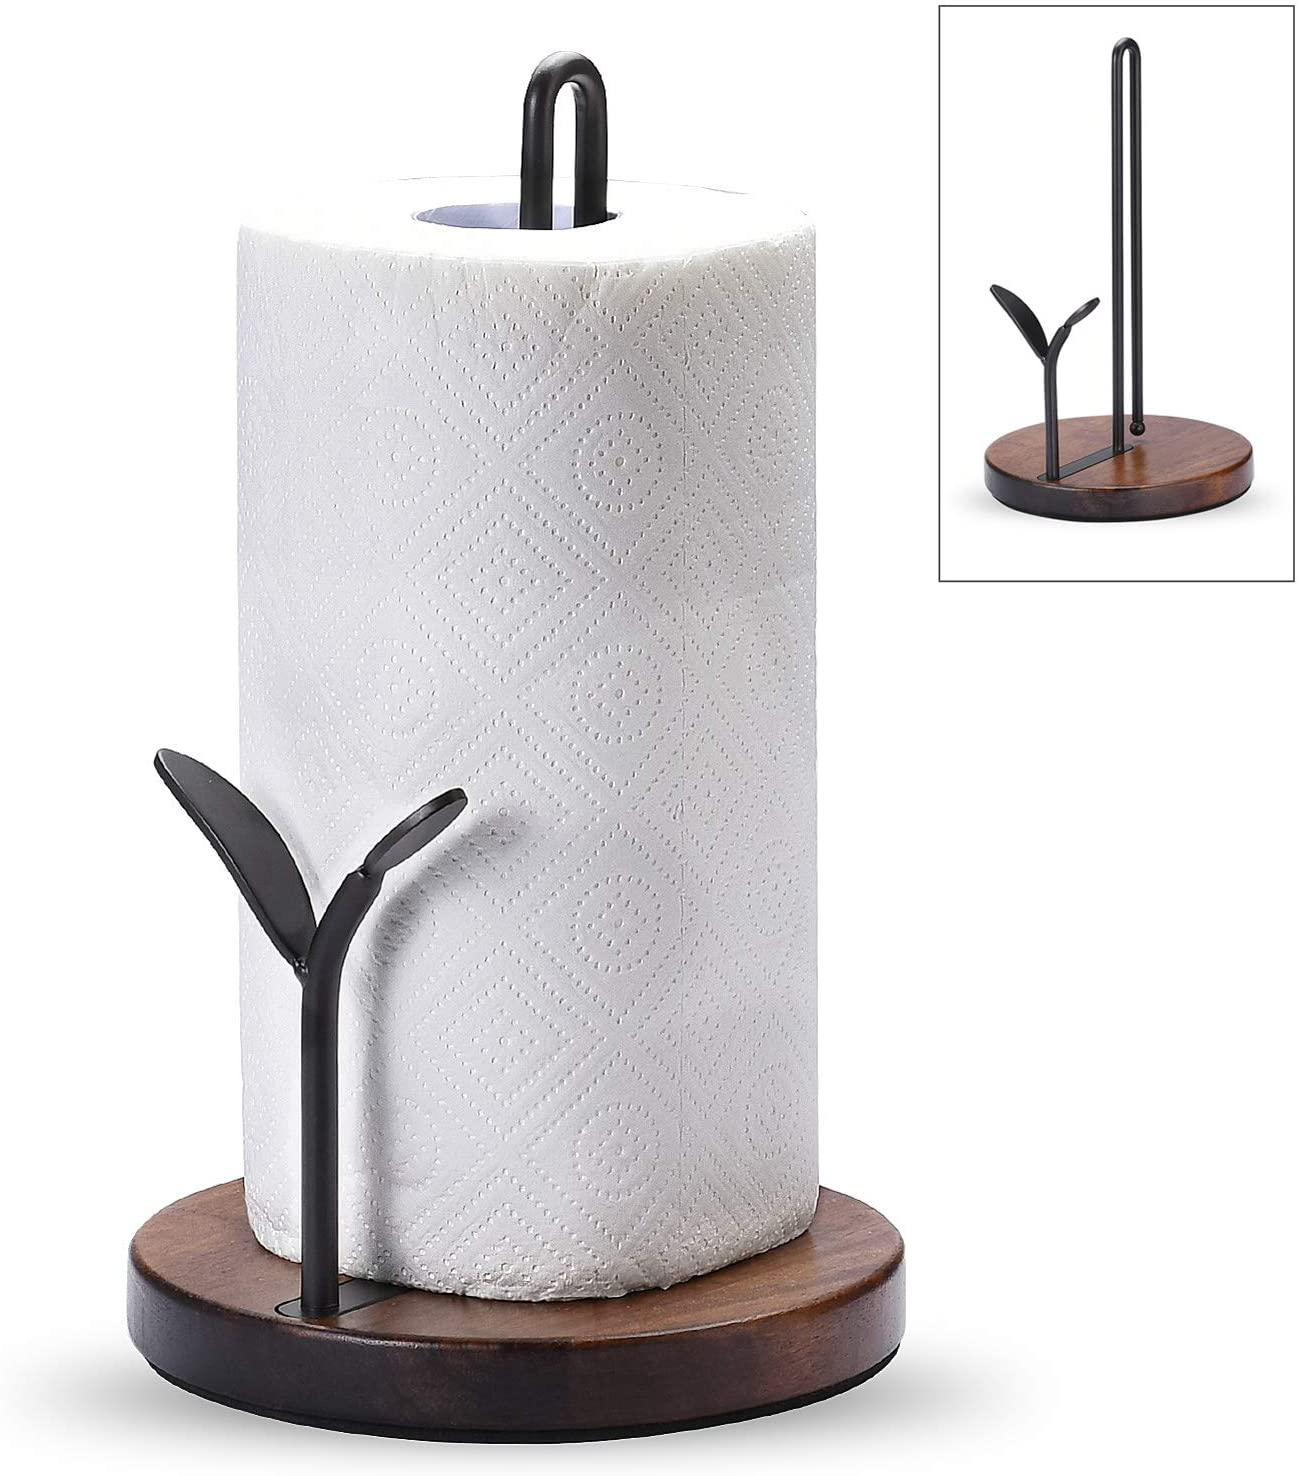 Standing Paper Towel Holder, Kitchen Paper Hanger Rack, Simply Tear Wooden Paper Towel Organizer Roll Dispenser for Cabinet Countertop Dining Room Table, Black(for 9" Paper)